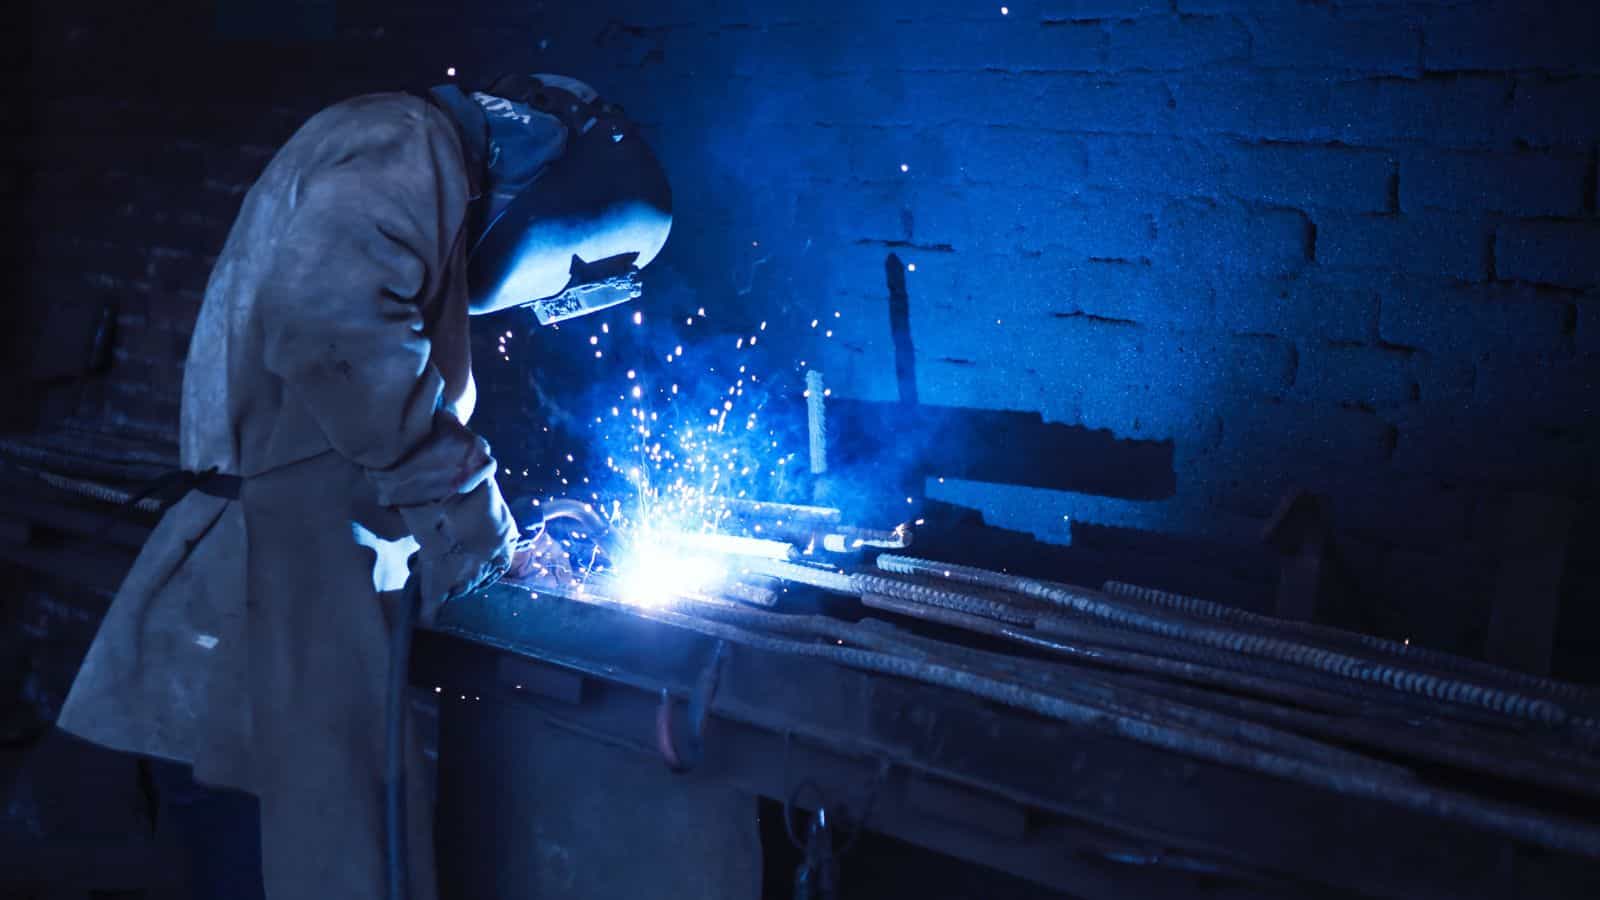 A worker welds two pieces of metal together in a workshop after choosing the best welding process after reading about the different types of welding techniques.